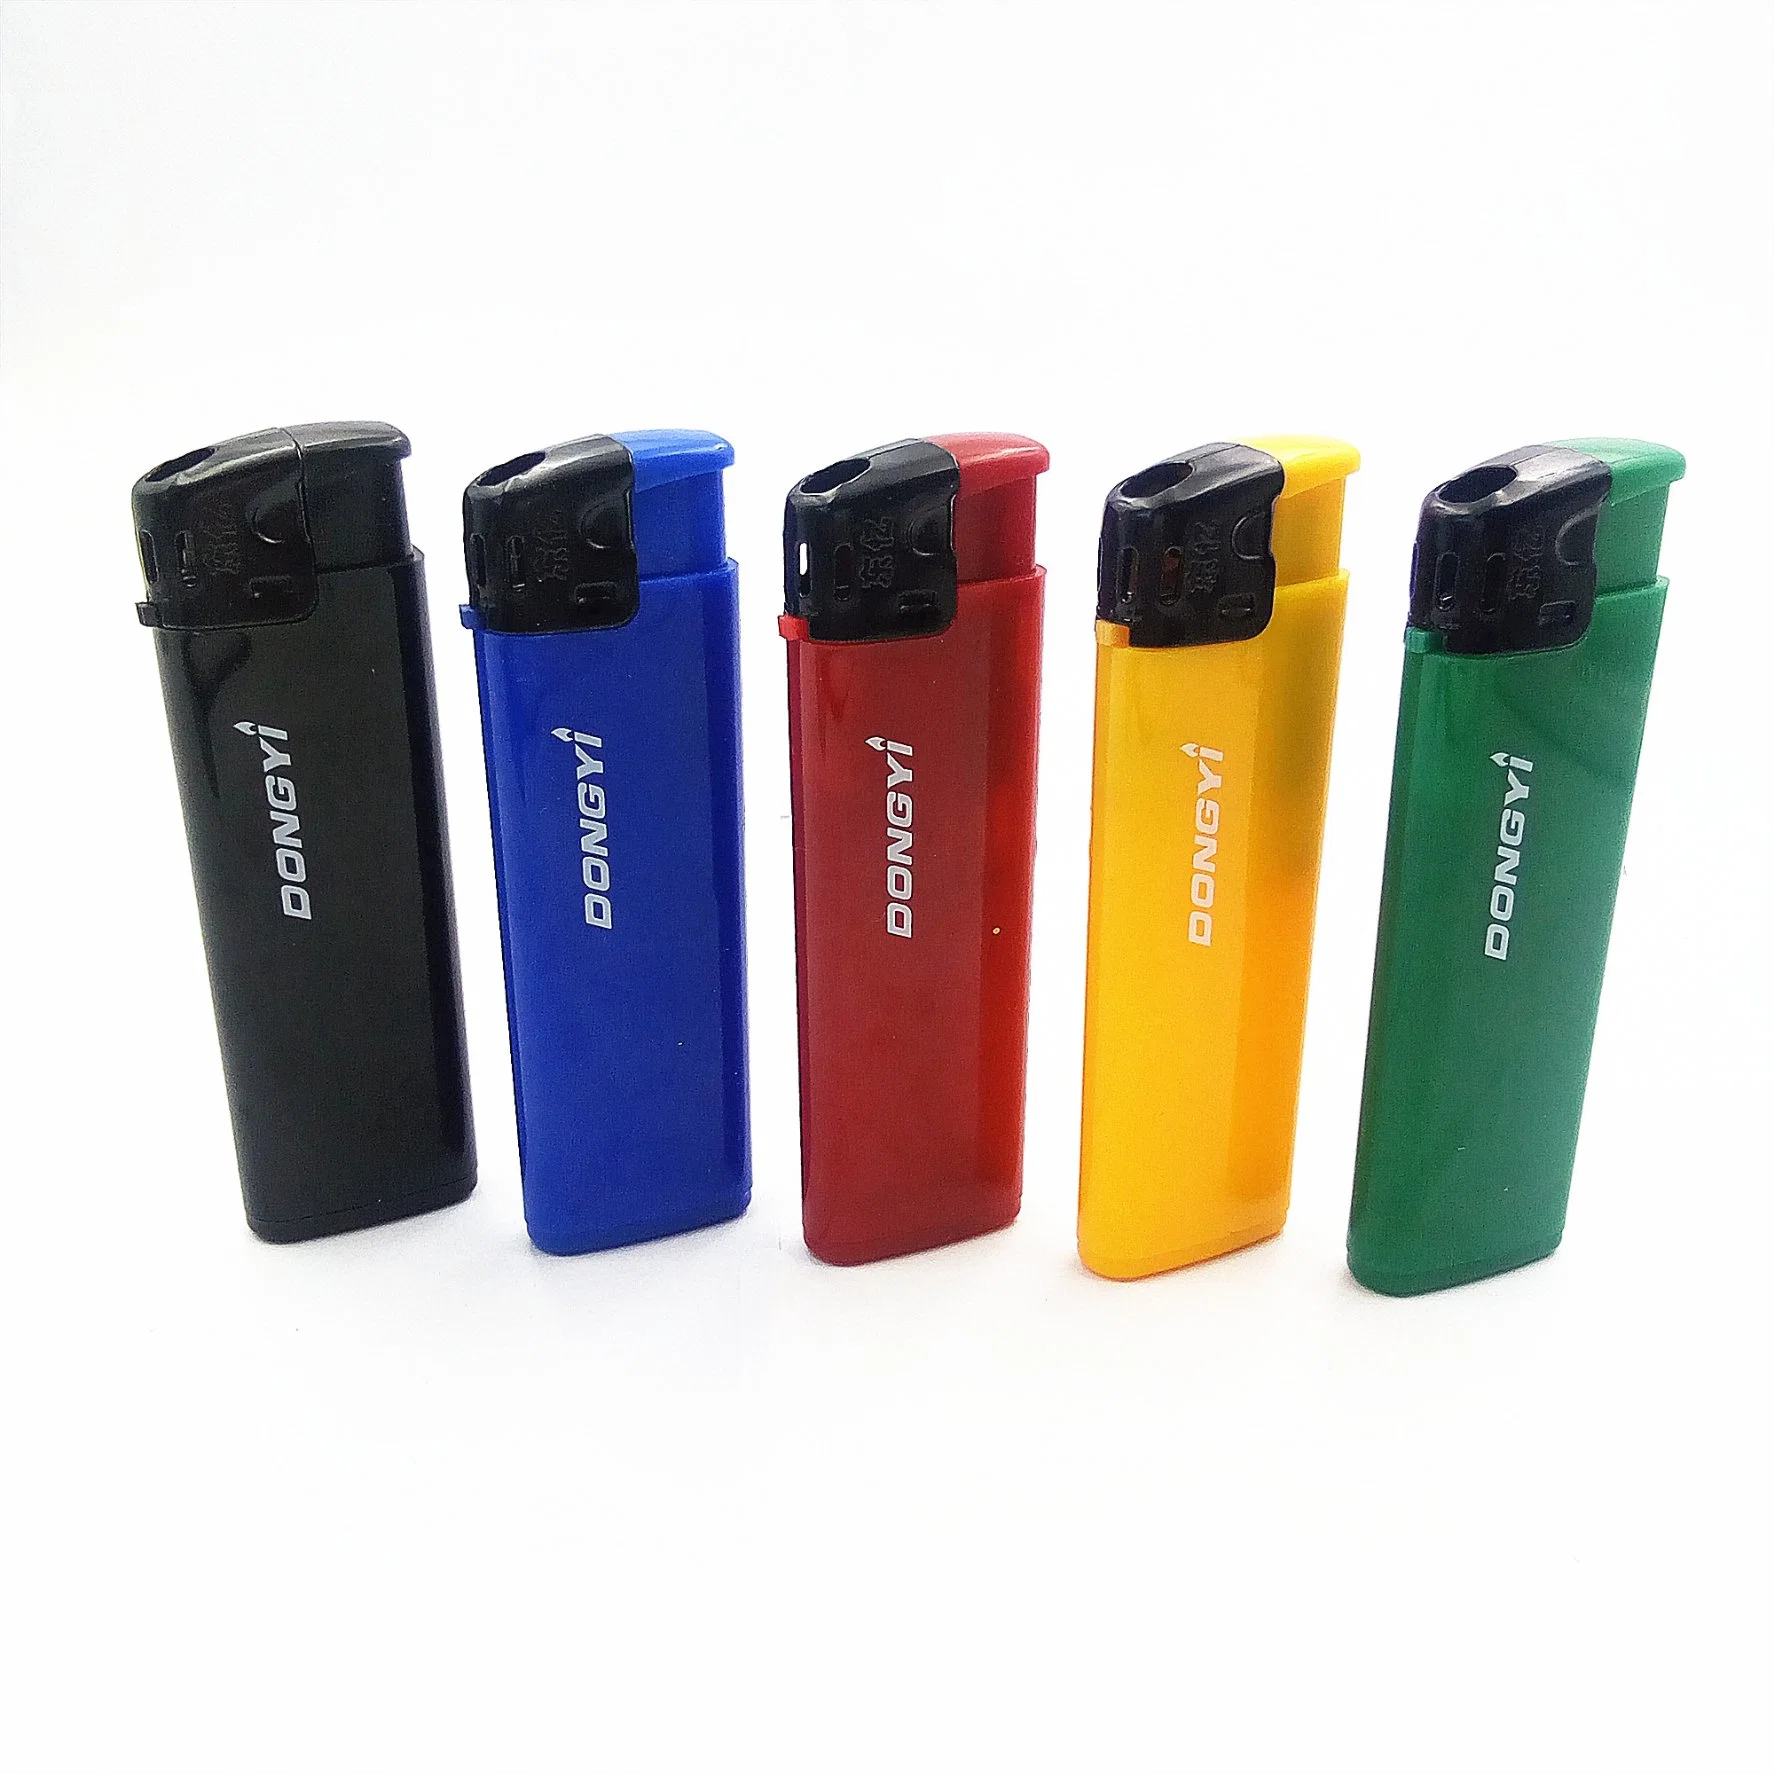 Hunan Dongyi 2021 High quality/High cost performance EUR Standard Lighter Plastic Electric Cigarette Electric Lighter Children Resistance Dy-055